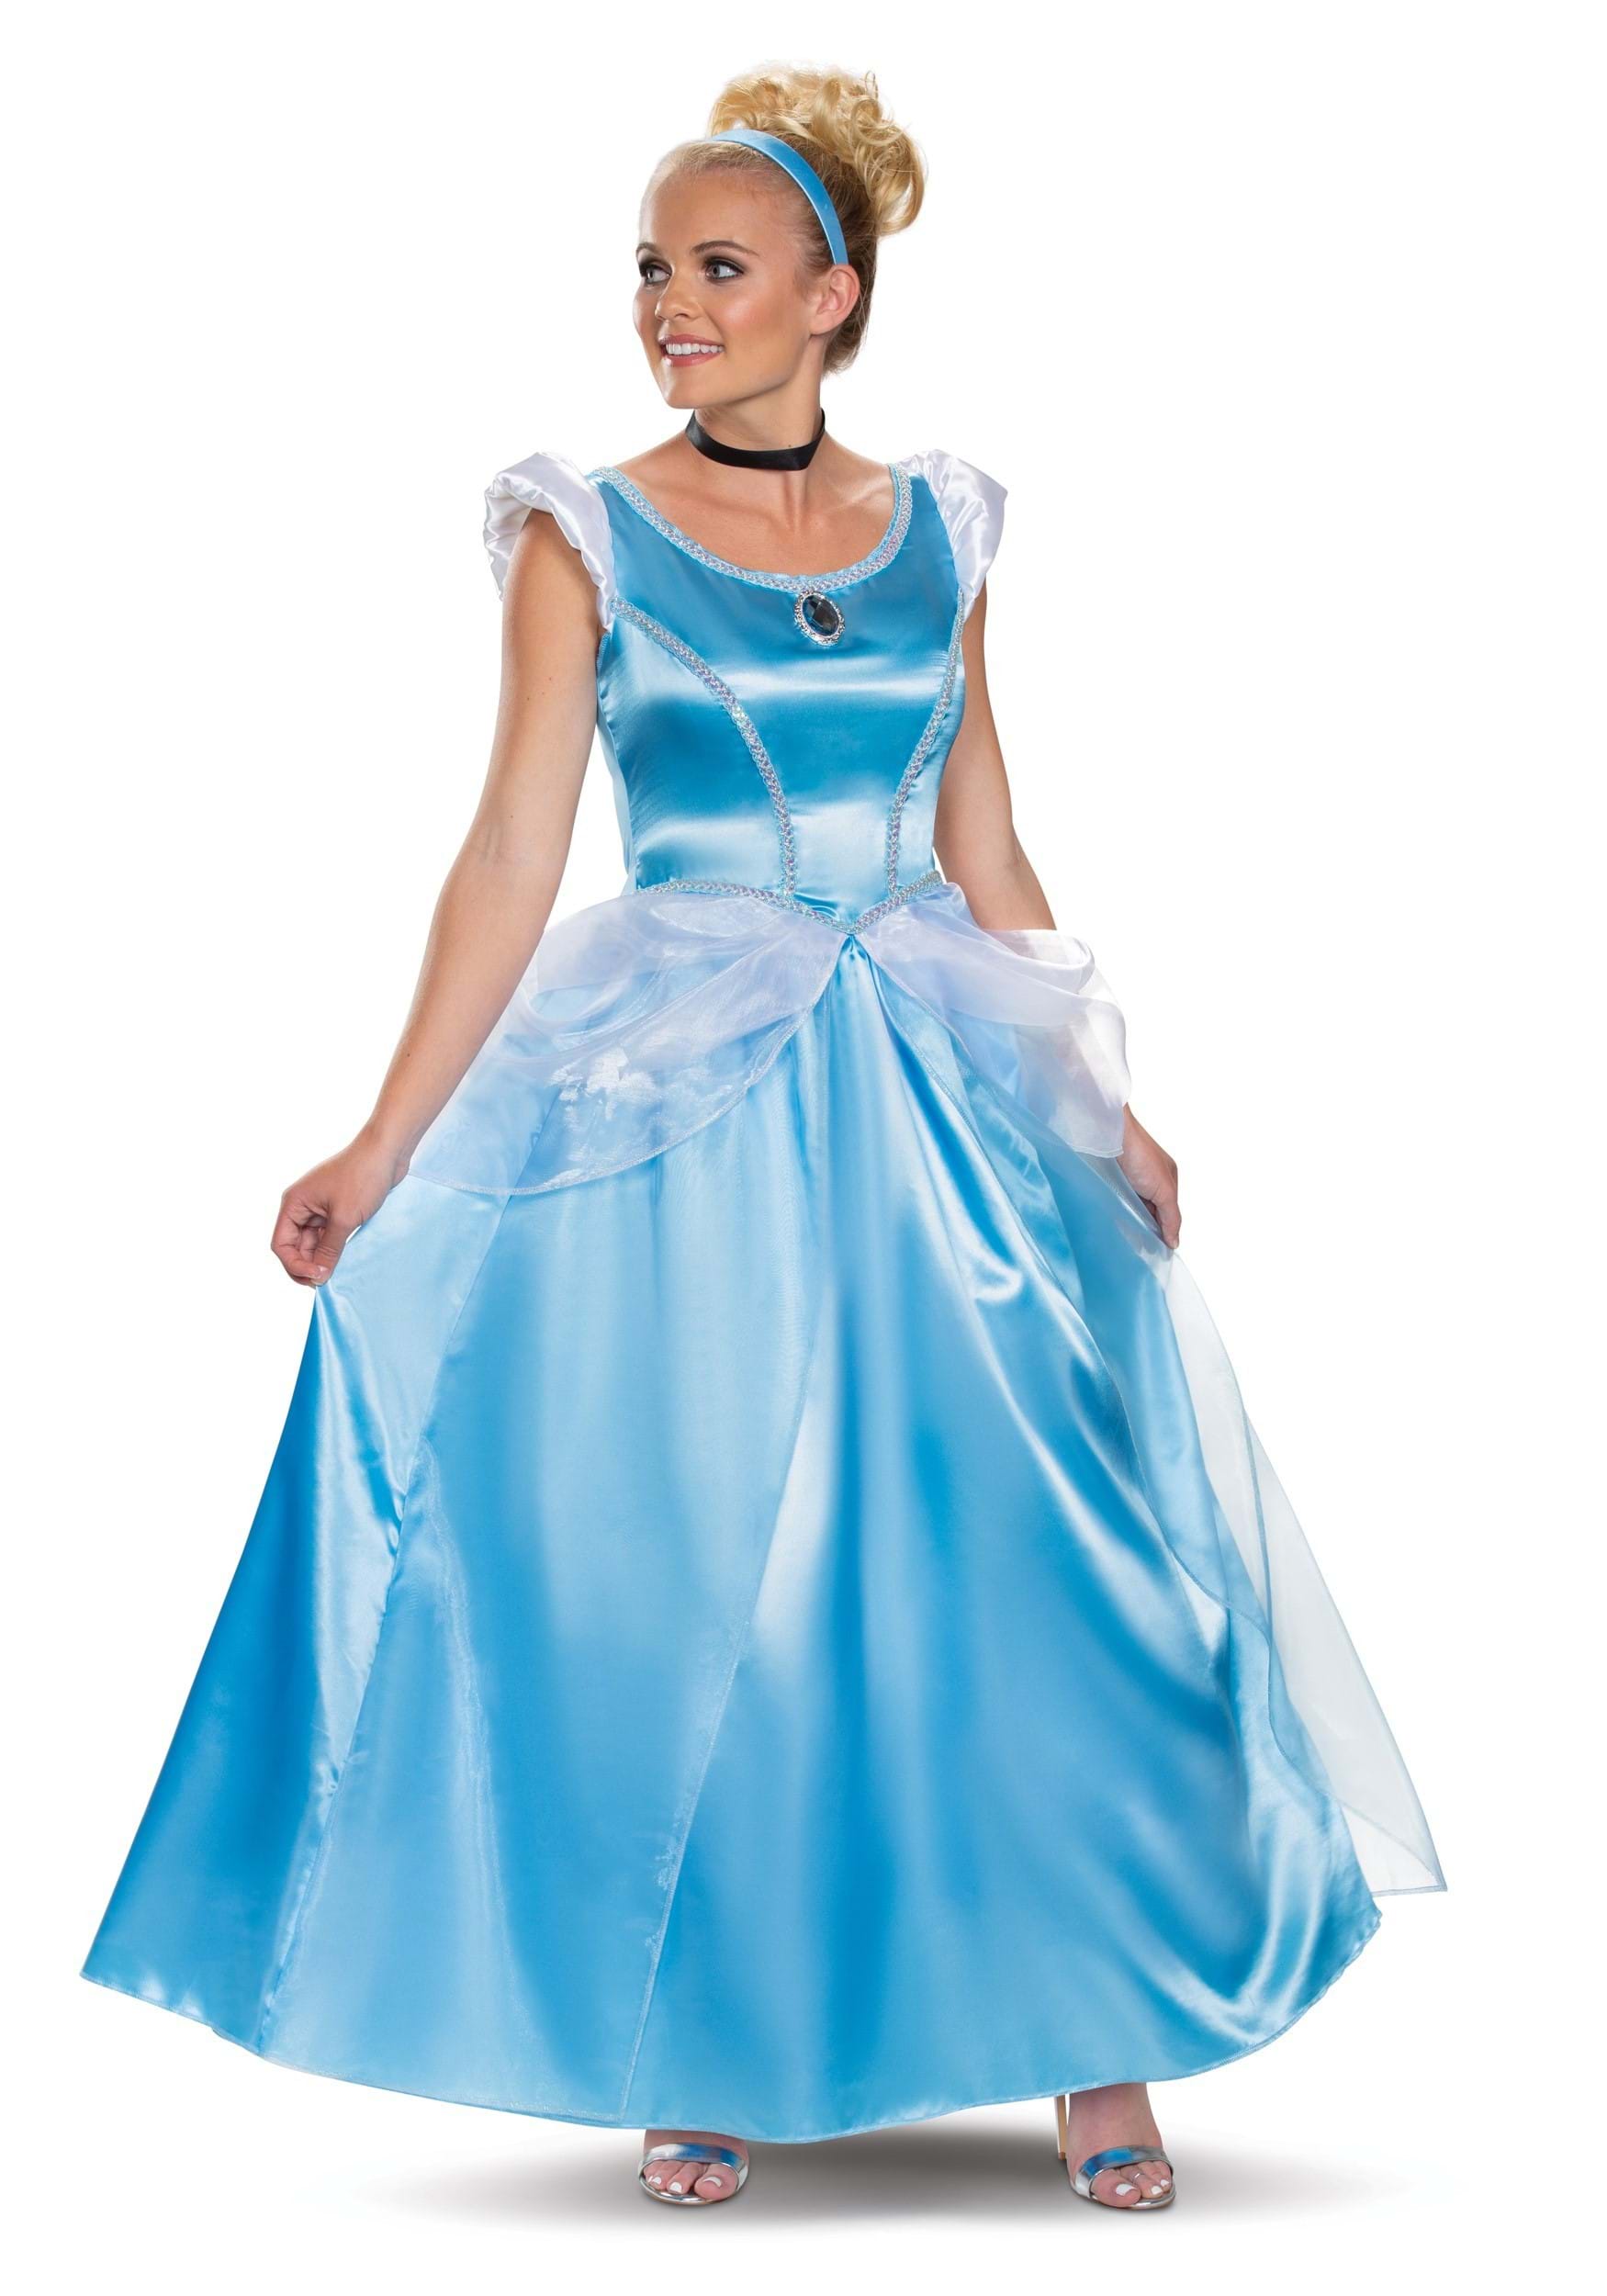 https://images.fun.com/products/79829/1-1/deluxe-womens-plus-size-cinderella-costume.jpg